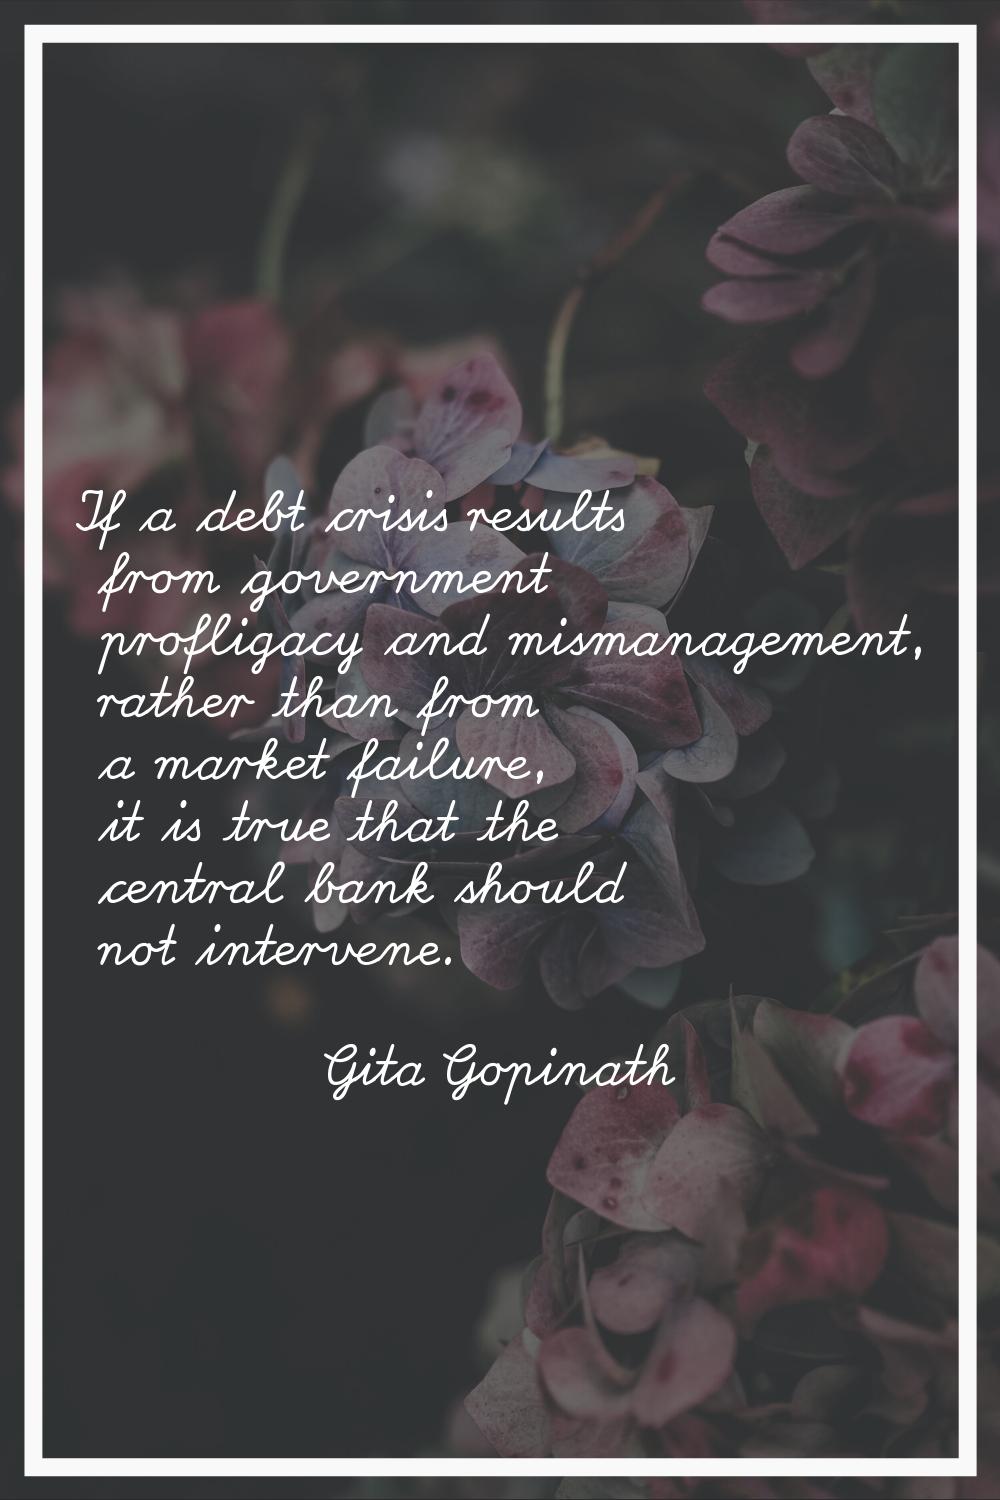 If a debt crisis results from government profligacy and mismanagement, rather than from a market fa